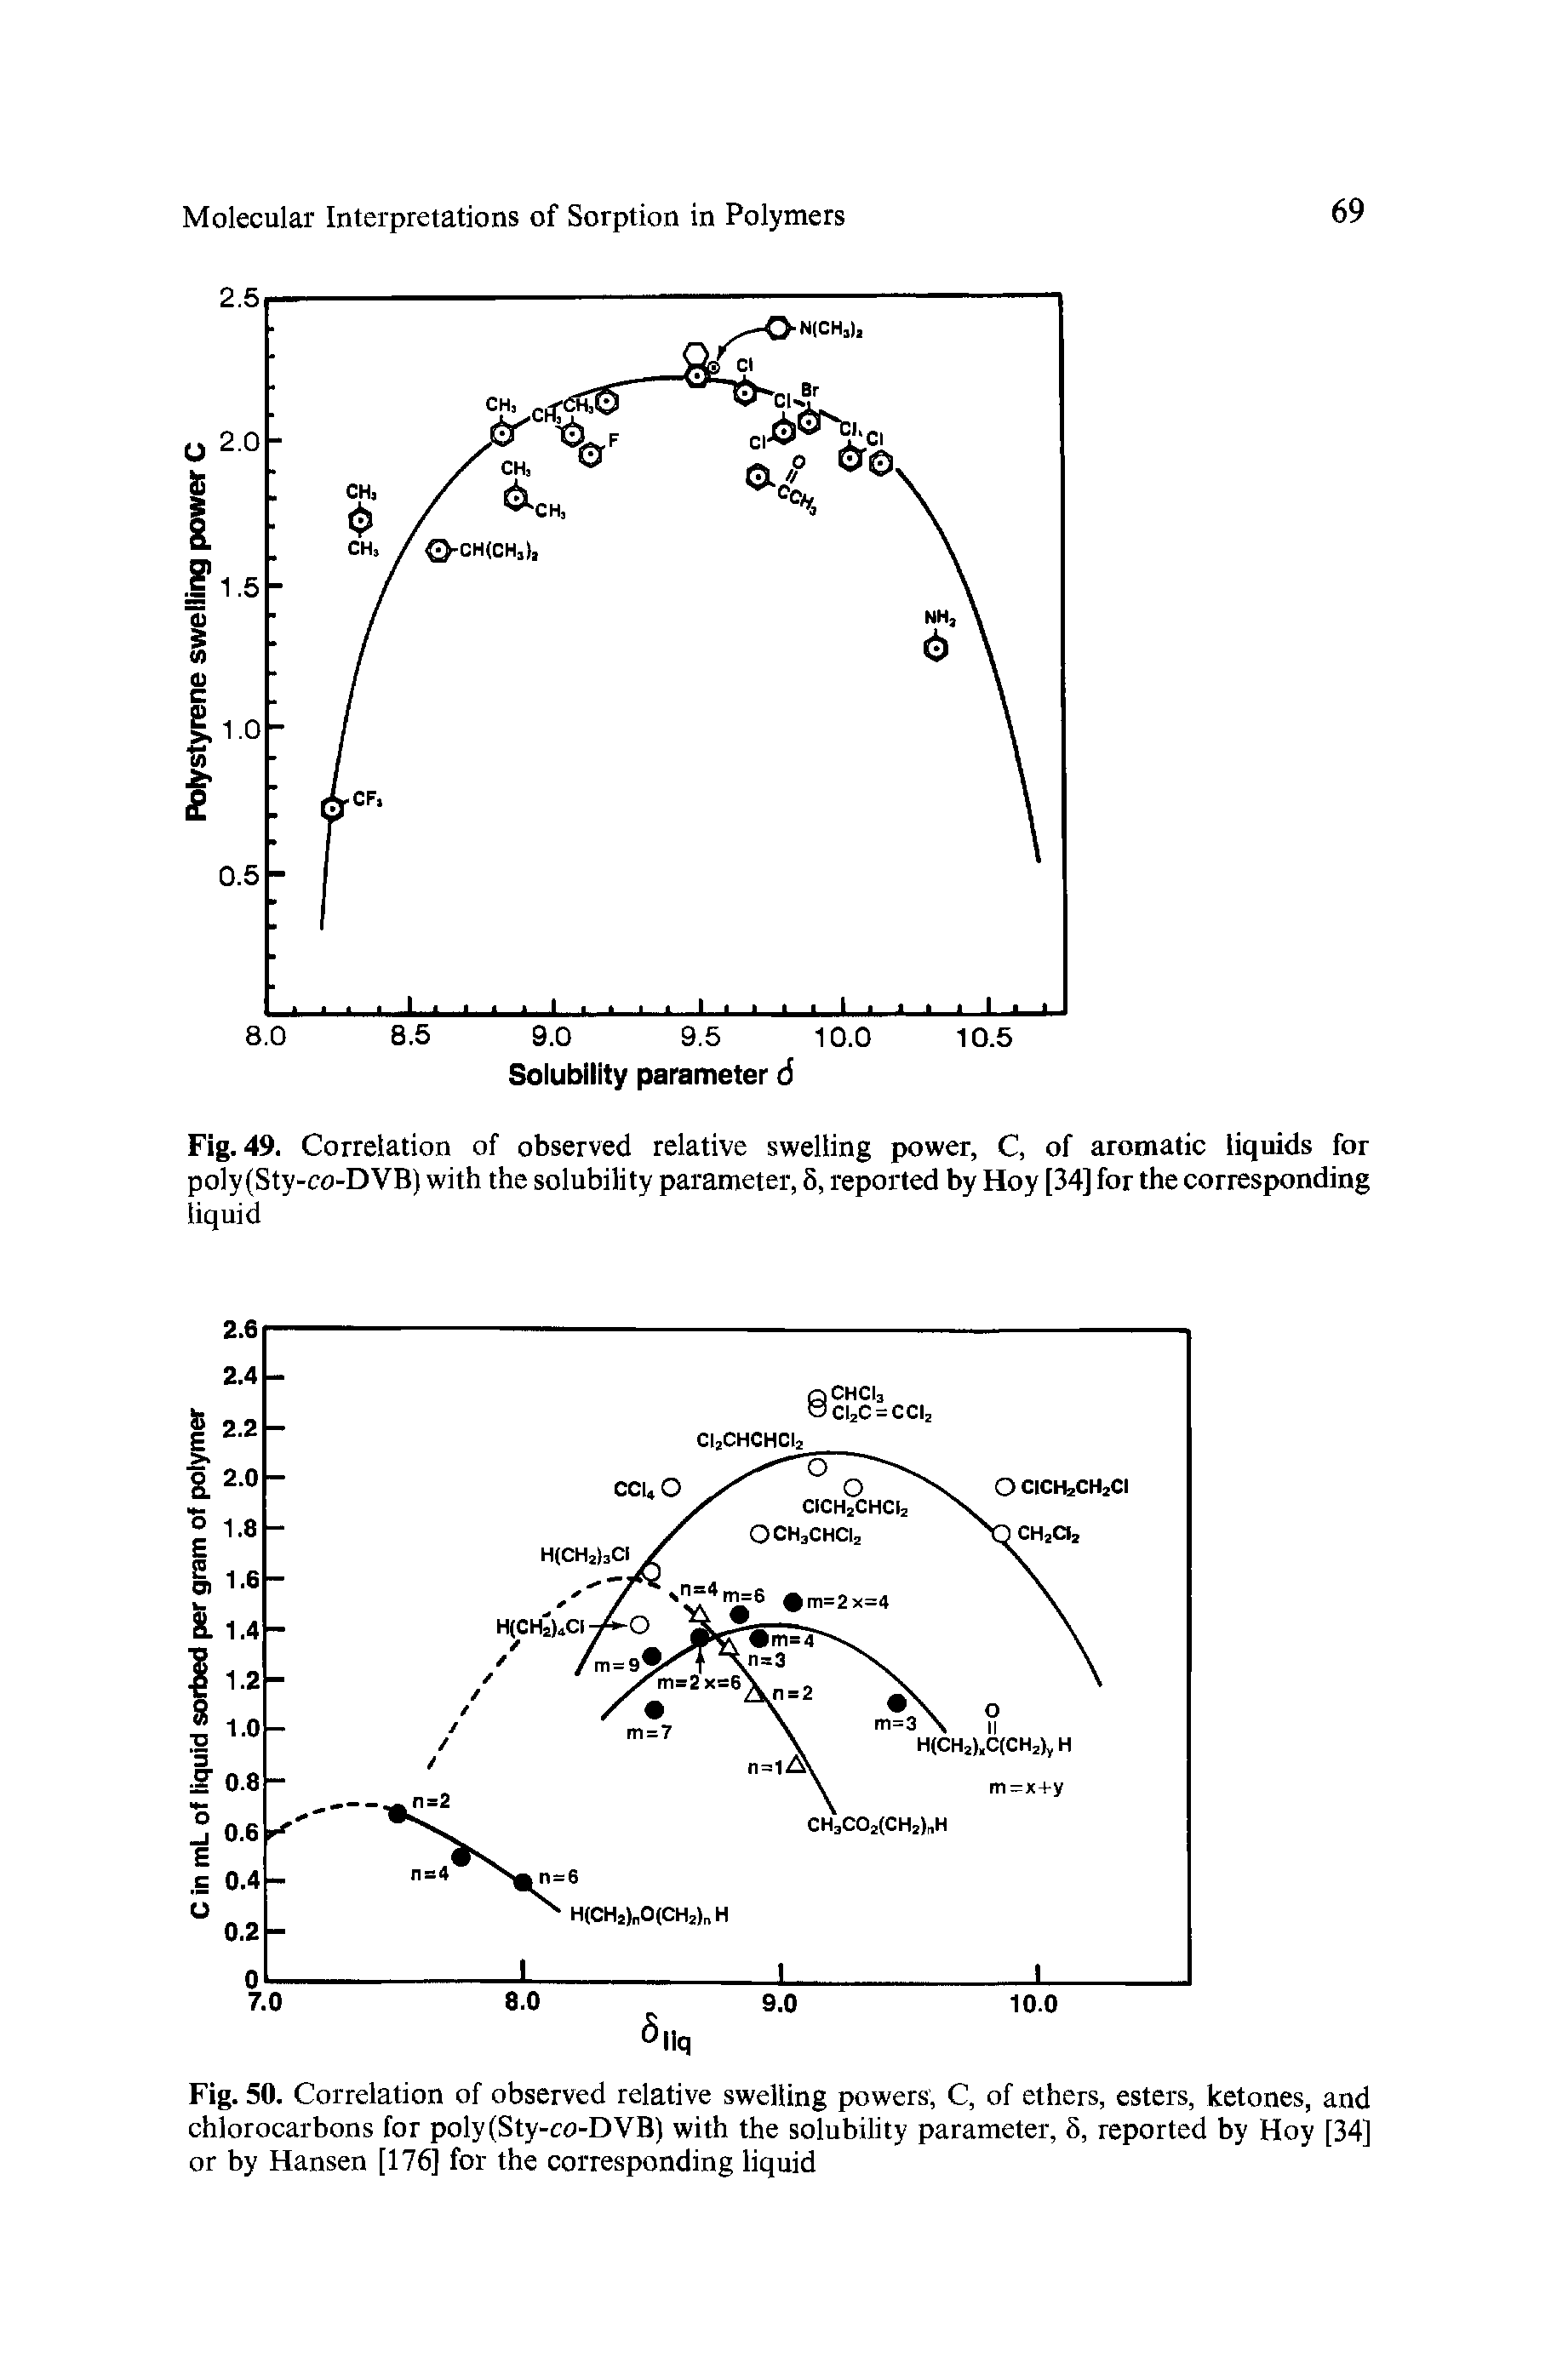 Fig. 50. Correlation of observed relative swelling powers, C, of ethers, esters, ketones, and chlorocarbons for poly (Sty-co-DVB) with the solubility parameter, 5, reported by Hoy [34] or by Hansen [176] for the corresponding liquid...